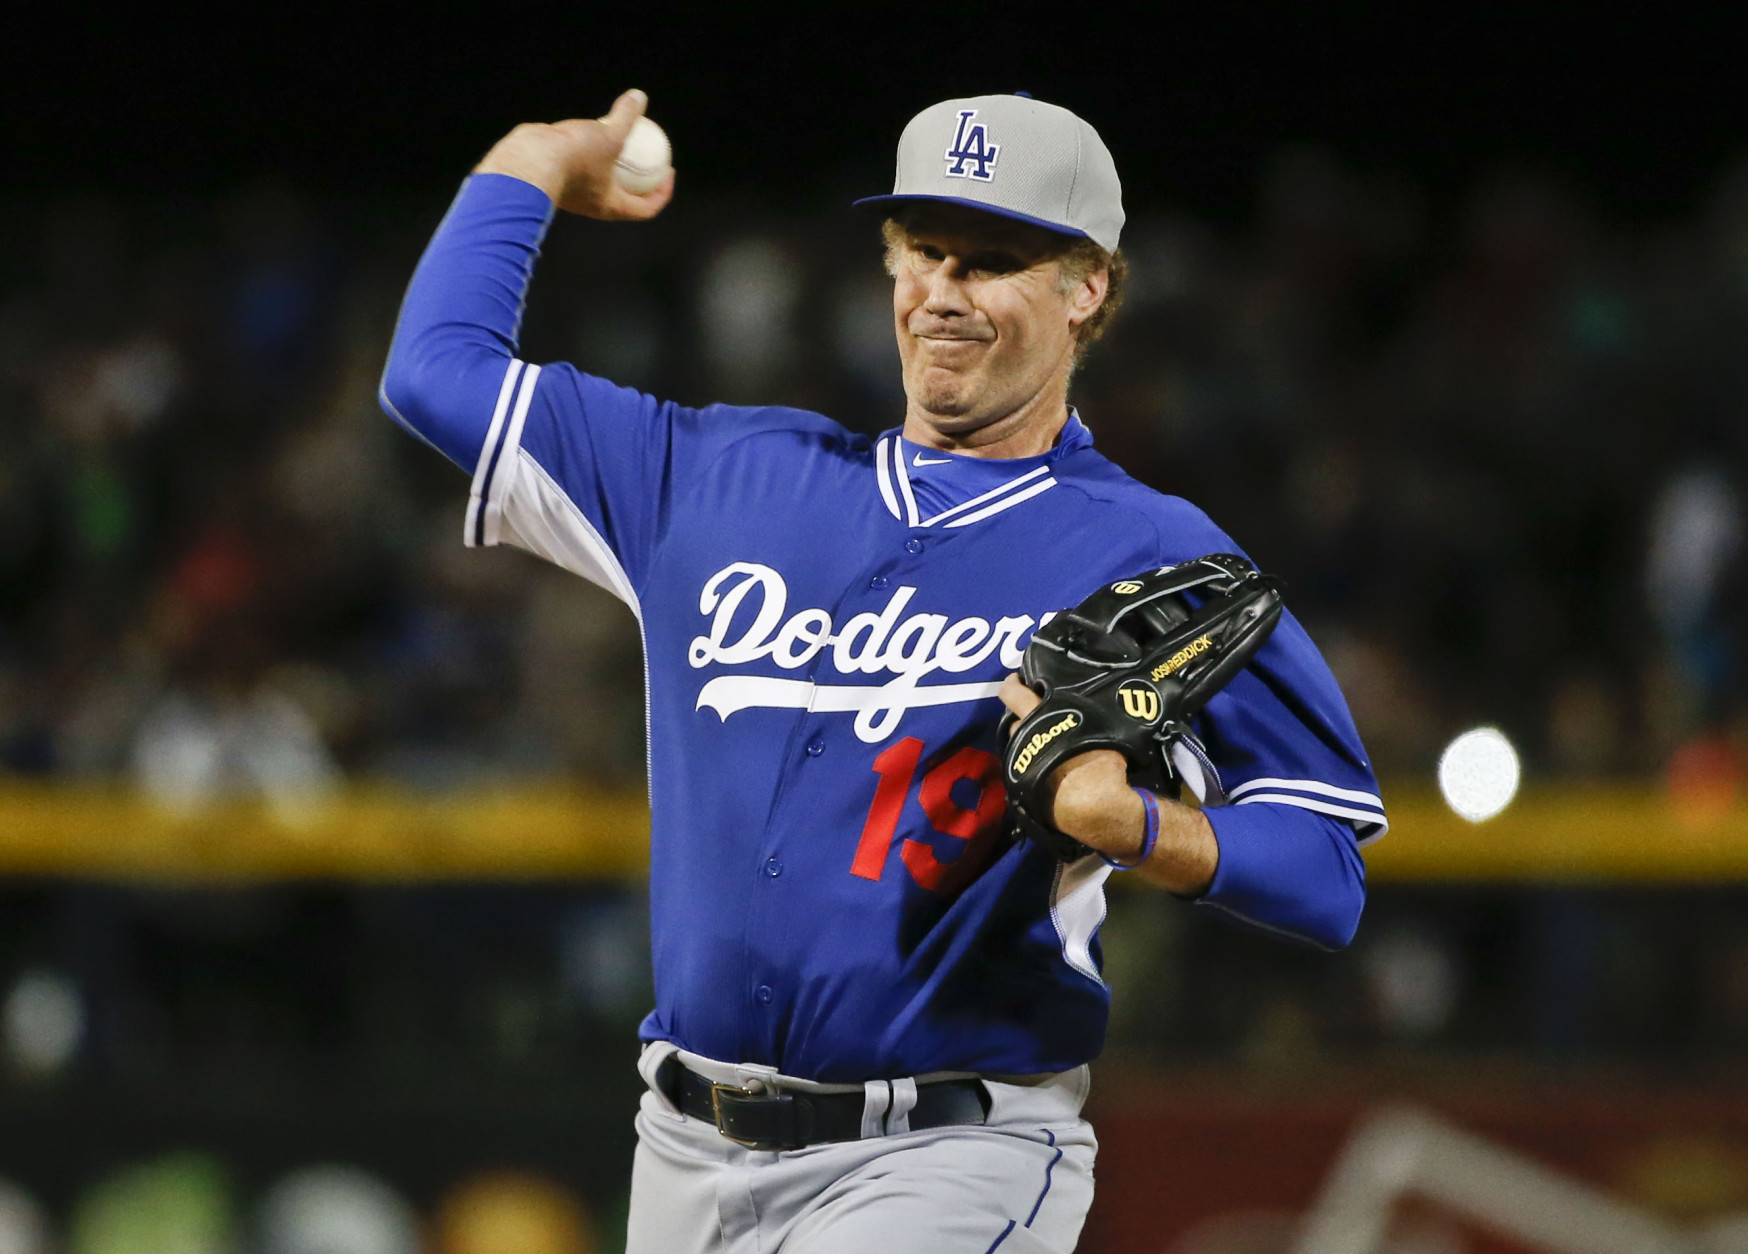 Actor Will Ferrell warms up for his pitching stint for the Los Angeles Dodgers during a spring training baseball game between the San Diego Padres and the Los Angeles Dodgers Thursday, March 12, 2015, in Peoria, Ariz.  (AP Photo/Lenny Ignelzi)